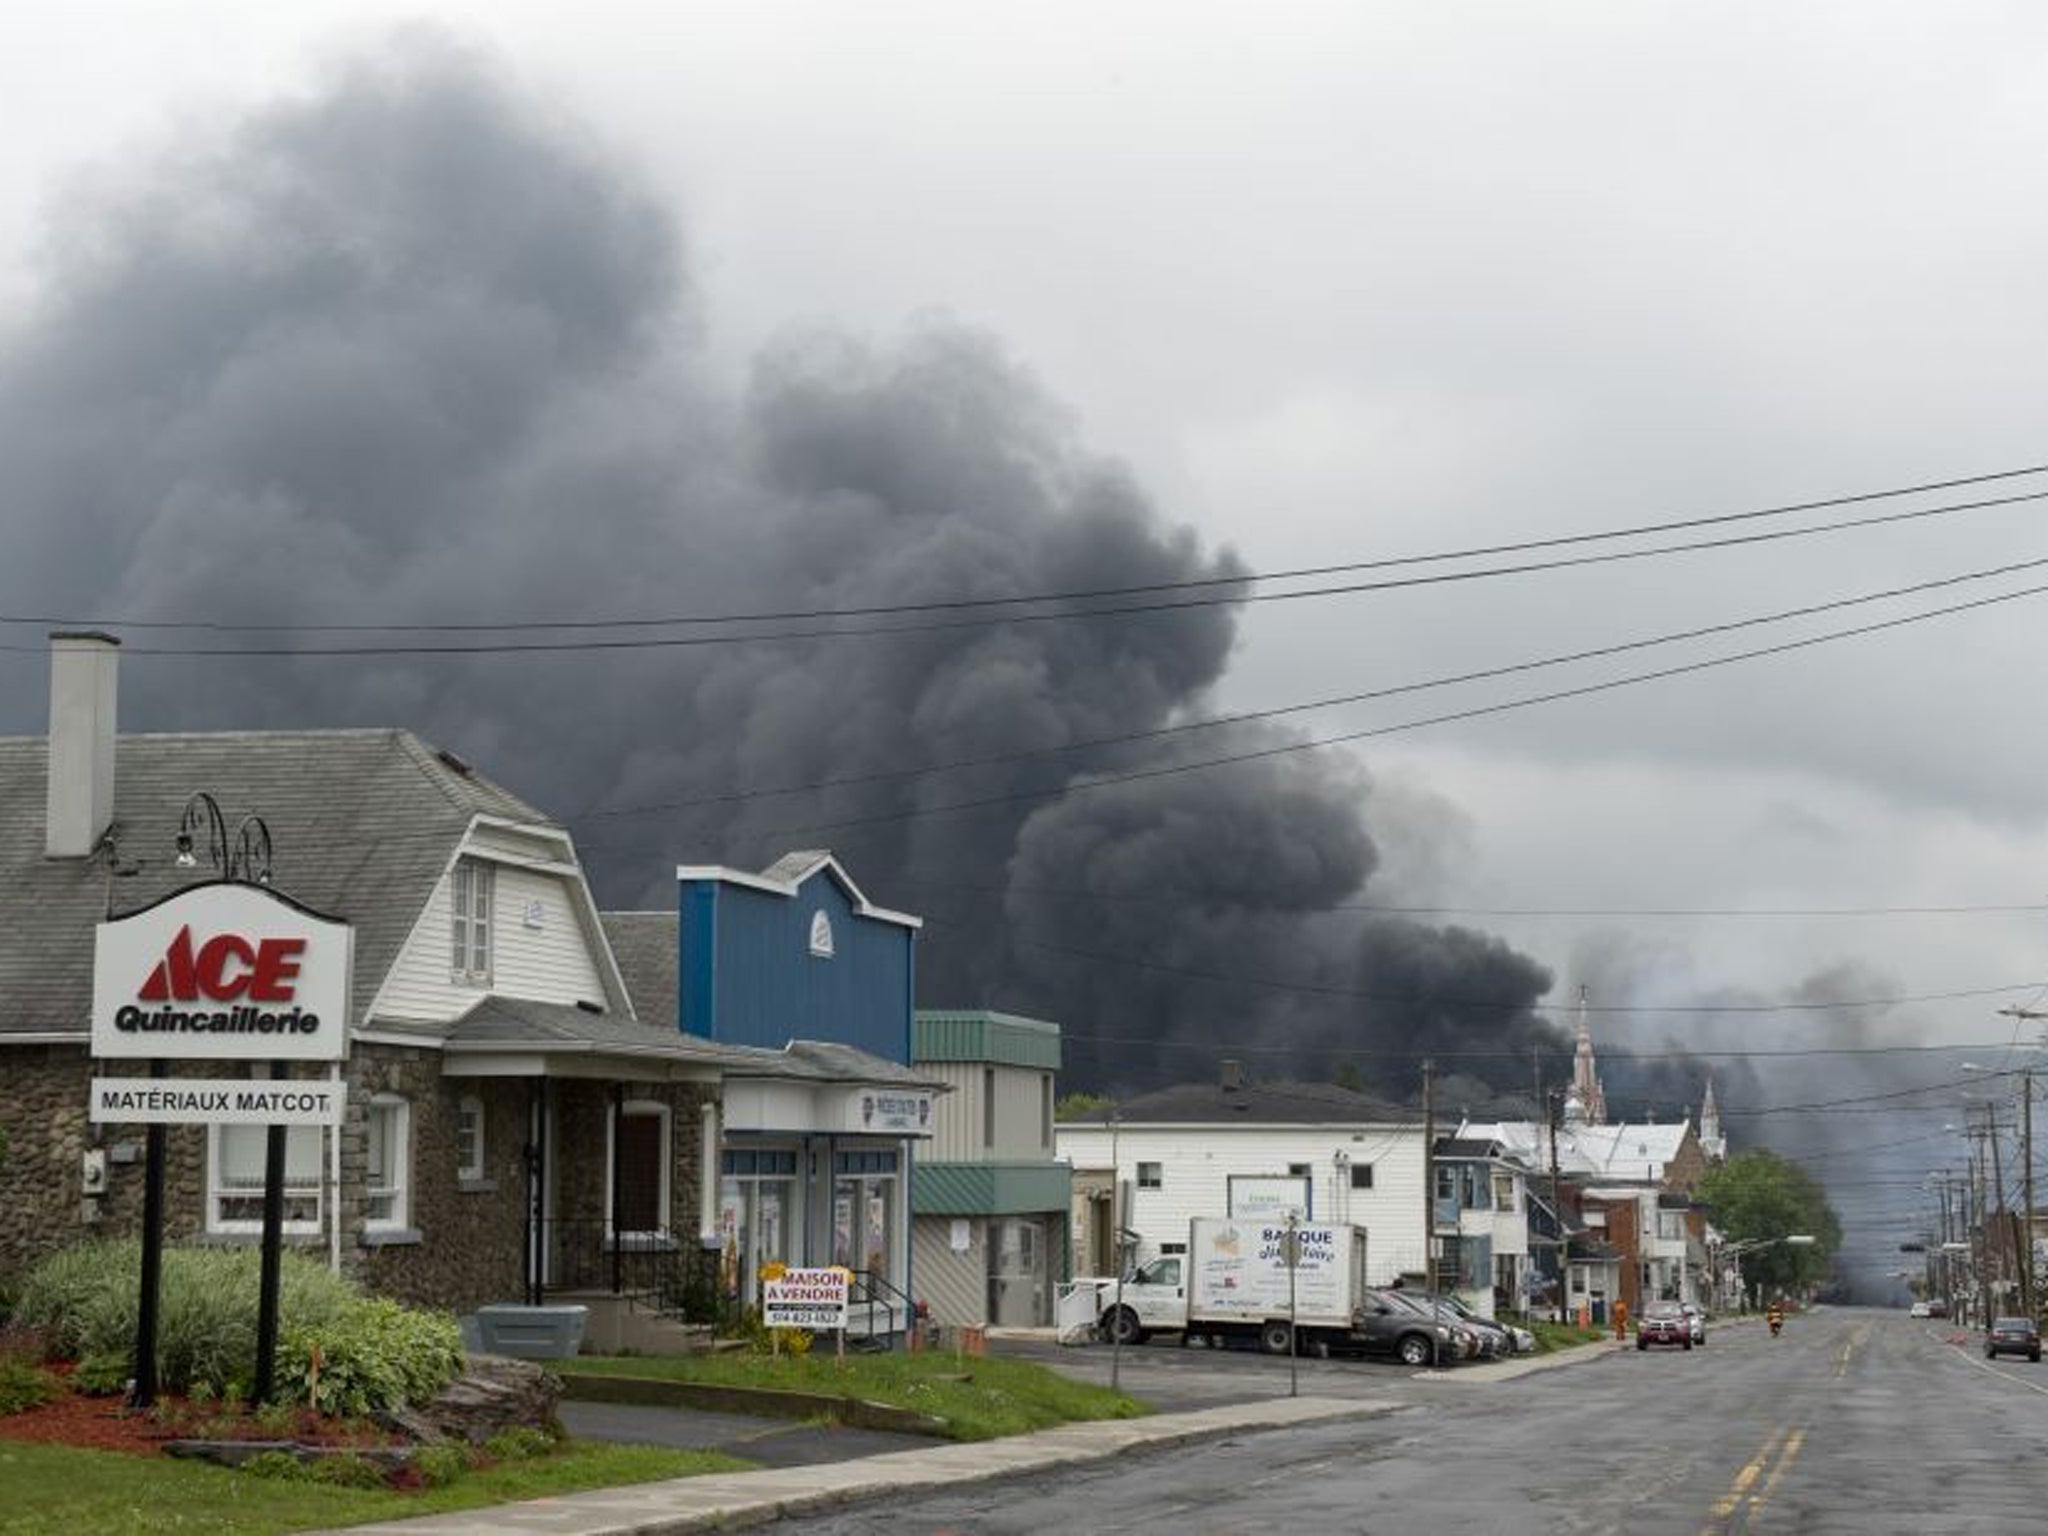 Smoke rises from railway cars that were carrying crude oil after derailing in downtown Lac Megantic, Quebec, Canada (AP)